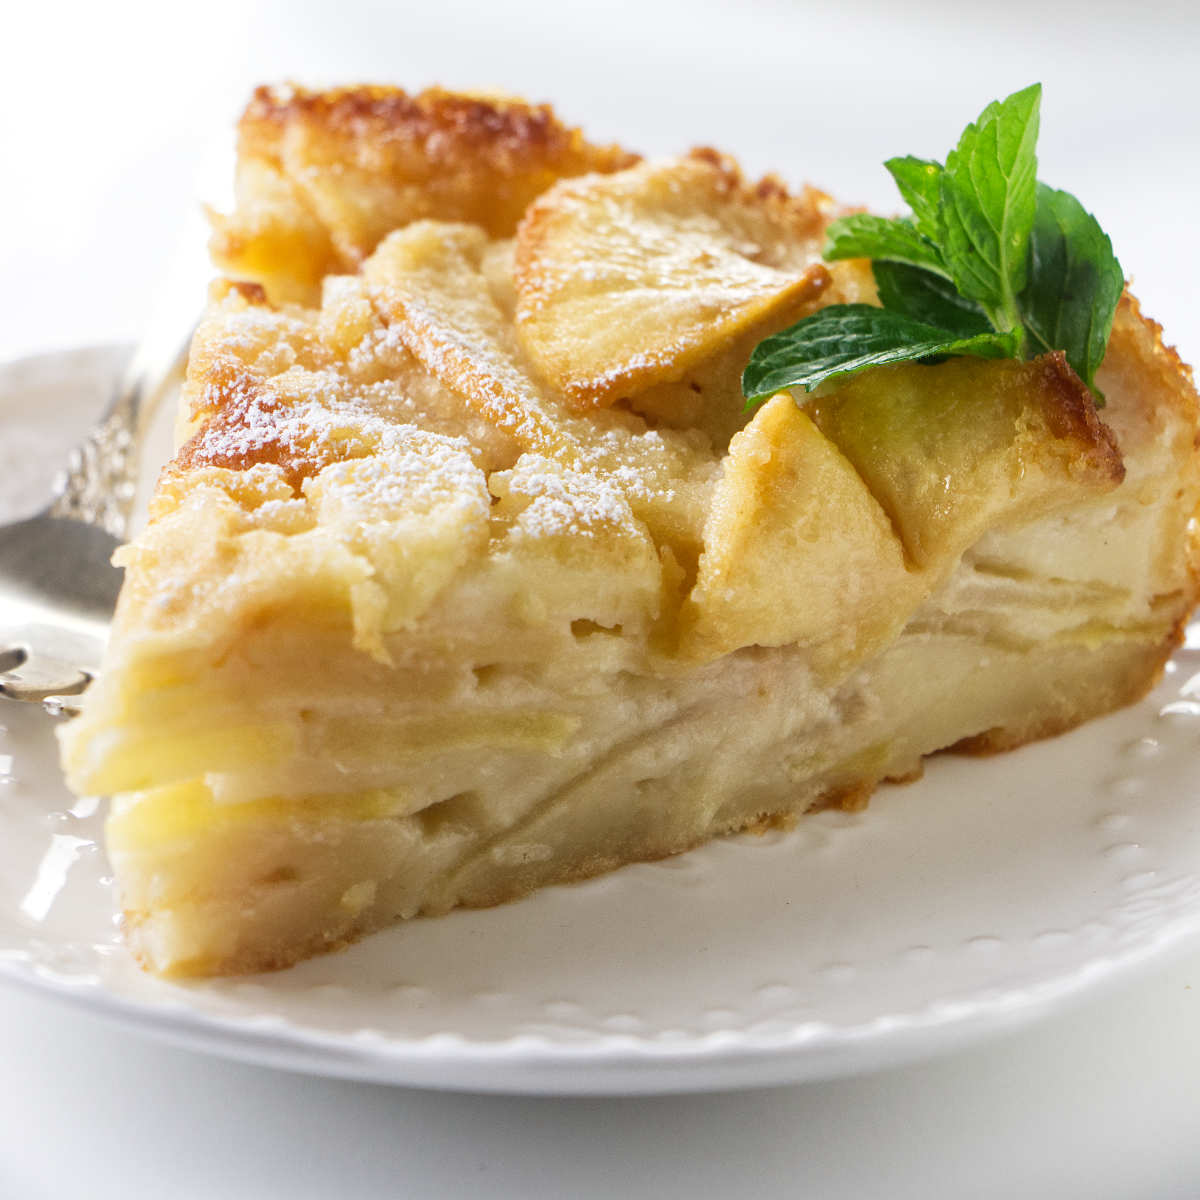 A slice of apple cake on a plate.